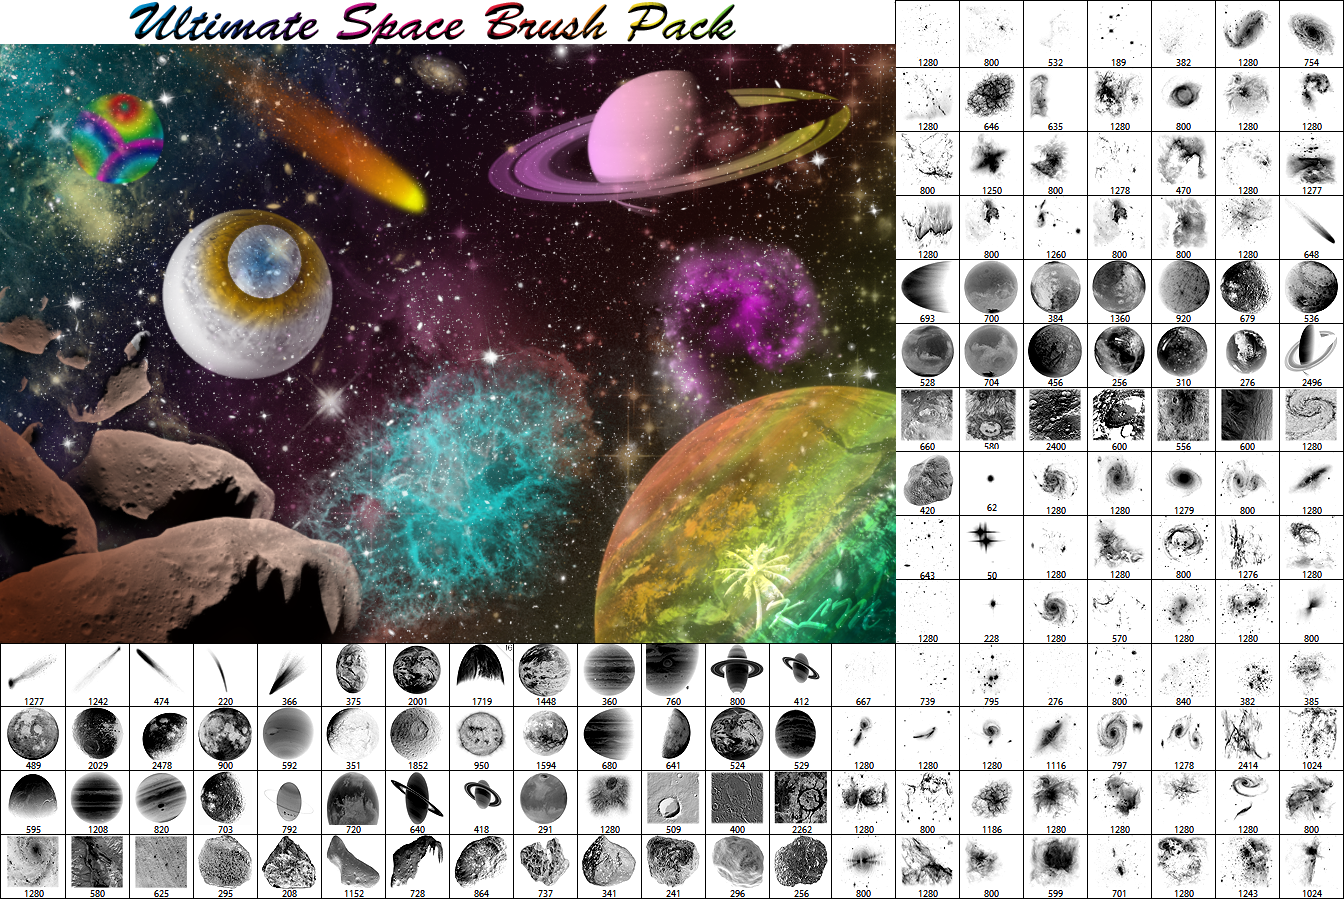 Ultimate Space Brush Pack - Part 2